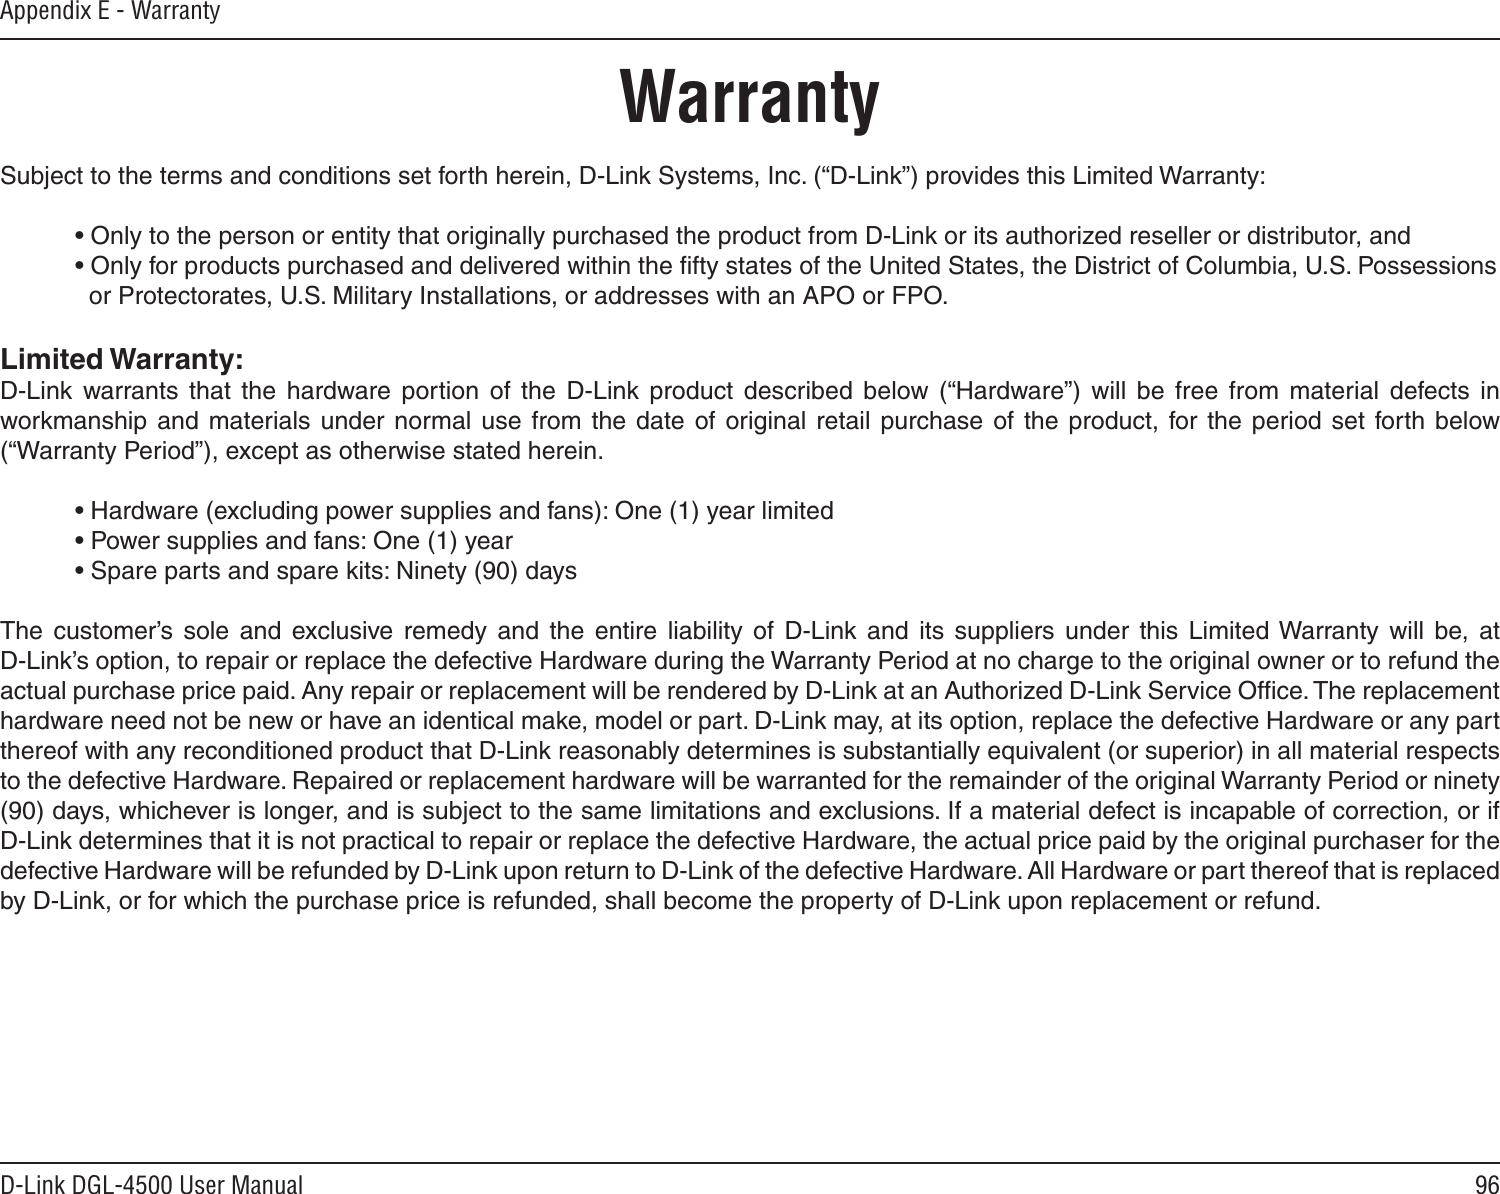 96D-Link DGL-4500 User ManualAppendix E - WarrantyWarrantySubject to the terms and conditions set forth herein, D-Link Systems, Inc. (“D-Link”) provides this Limited Warranty:  • Only to the person or entity that originally purchased the product from D-Link or its authorized reseller or distributor, and  • Only for products purchased and delivered within the ﬁfty states of the United States, the District of Columbia, U.S. Possessions      or Protectorates, U.S. Military Installations, or addresses with an APO or FPO.Limited Warranty:D-Link  warrants  that  the  hardware  portion  of  the  D-Link  product  described  below  (“Hardware”)  will  be  free  from  material  defects  in workmanship  and  materials  under  normal use  from  the  date of original  retail purchase  of  the  product,  for  the  period  set  forth  below (“Warranty Period”), except as otherwise stated herein.  • Hardware (excluding power supplies and fans): One (1) year limited  • Power supplies and fans: One (1) year  • Spare parts and spare kits: Ninety (90) daysThe  customer’s  sole  and  exclusive  remedy  and  the  entire  liability  of  D-Link  and  its  suppliers  under  this  Limited Warranty  will  be,  at  D-Link’s option, to repair or replace the defective Hardware during the Warranty Period at no charge to the original owner or to refund the actual purchase price paid. Any repair or replacement will be rendered by D-Link at an Authorized D-Link Service Ofﬁce. The replacement hardware need not be new or have an identical make, model or part. D-Link may, at its option, replace the defective Hardware or any part thereof with any reconditioned product that D-Link reasonably determines is substantially equivalent (or superior) in all material respects to the defective Hardware. Repaired or replacement hardware will be warranted for the remainder of the original Warranty Period or ninety (90) days, whichever is longer, and is subject to the same limitations and exclusions. If a material defect is incapable of correction, or if D-Link determines that it is not practical to repair or replace the defective Hardware, the actual price paid by the original purchaser for the defective Hardware will be refunded by D-Link upon return to D-Link of the defective Hardware. All Hardware or part thereof that is replaced by D-Link, or for which the purchase price is refunded, shall become the property of D-Link upon replacement or refund.